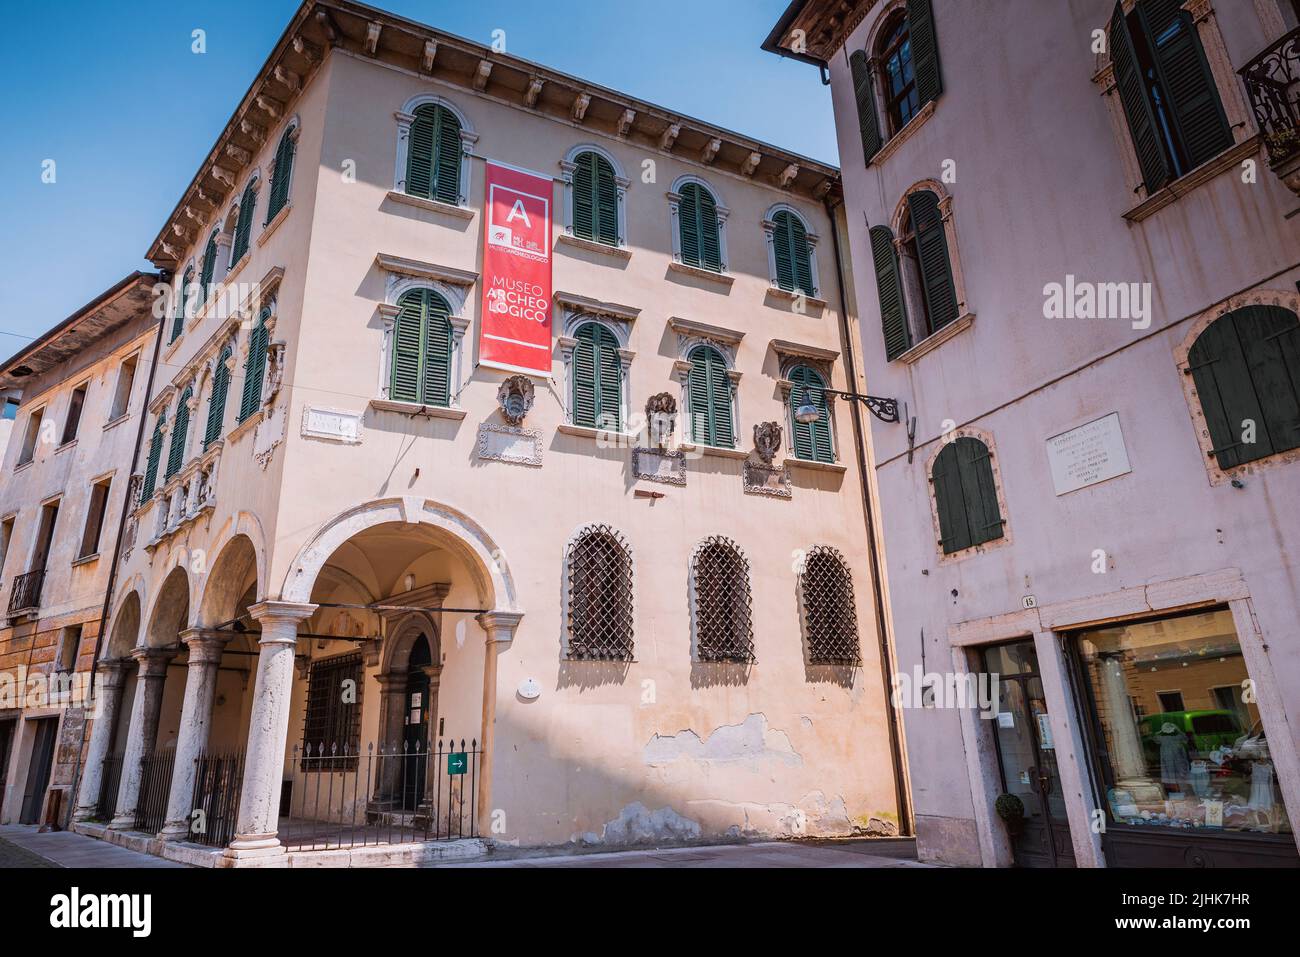 Palazzo Dei Giuristi. Built in 1664 by the College of Jurists, created in 1491 to gather the bellunese graduated in Law at Padua University. On the ou Stock Photo